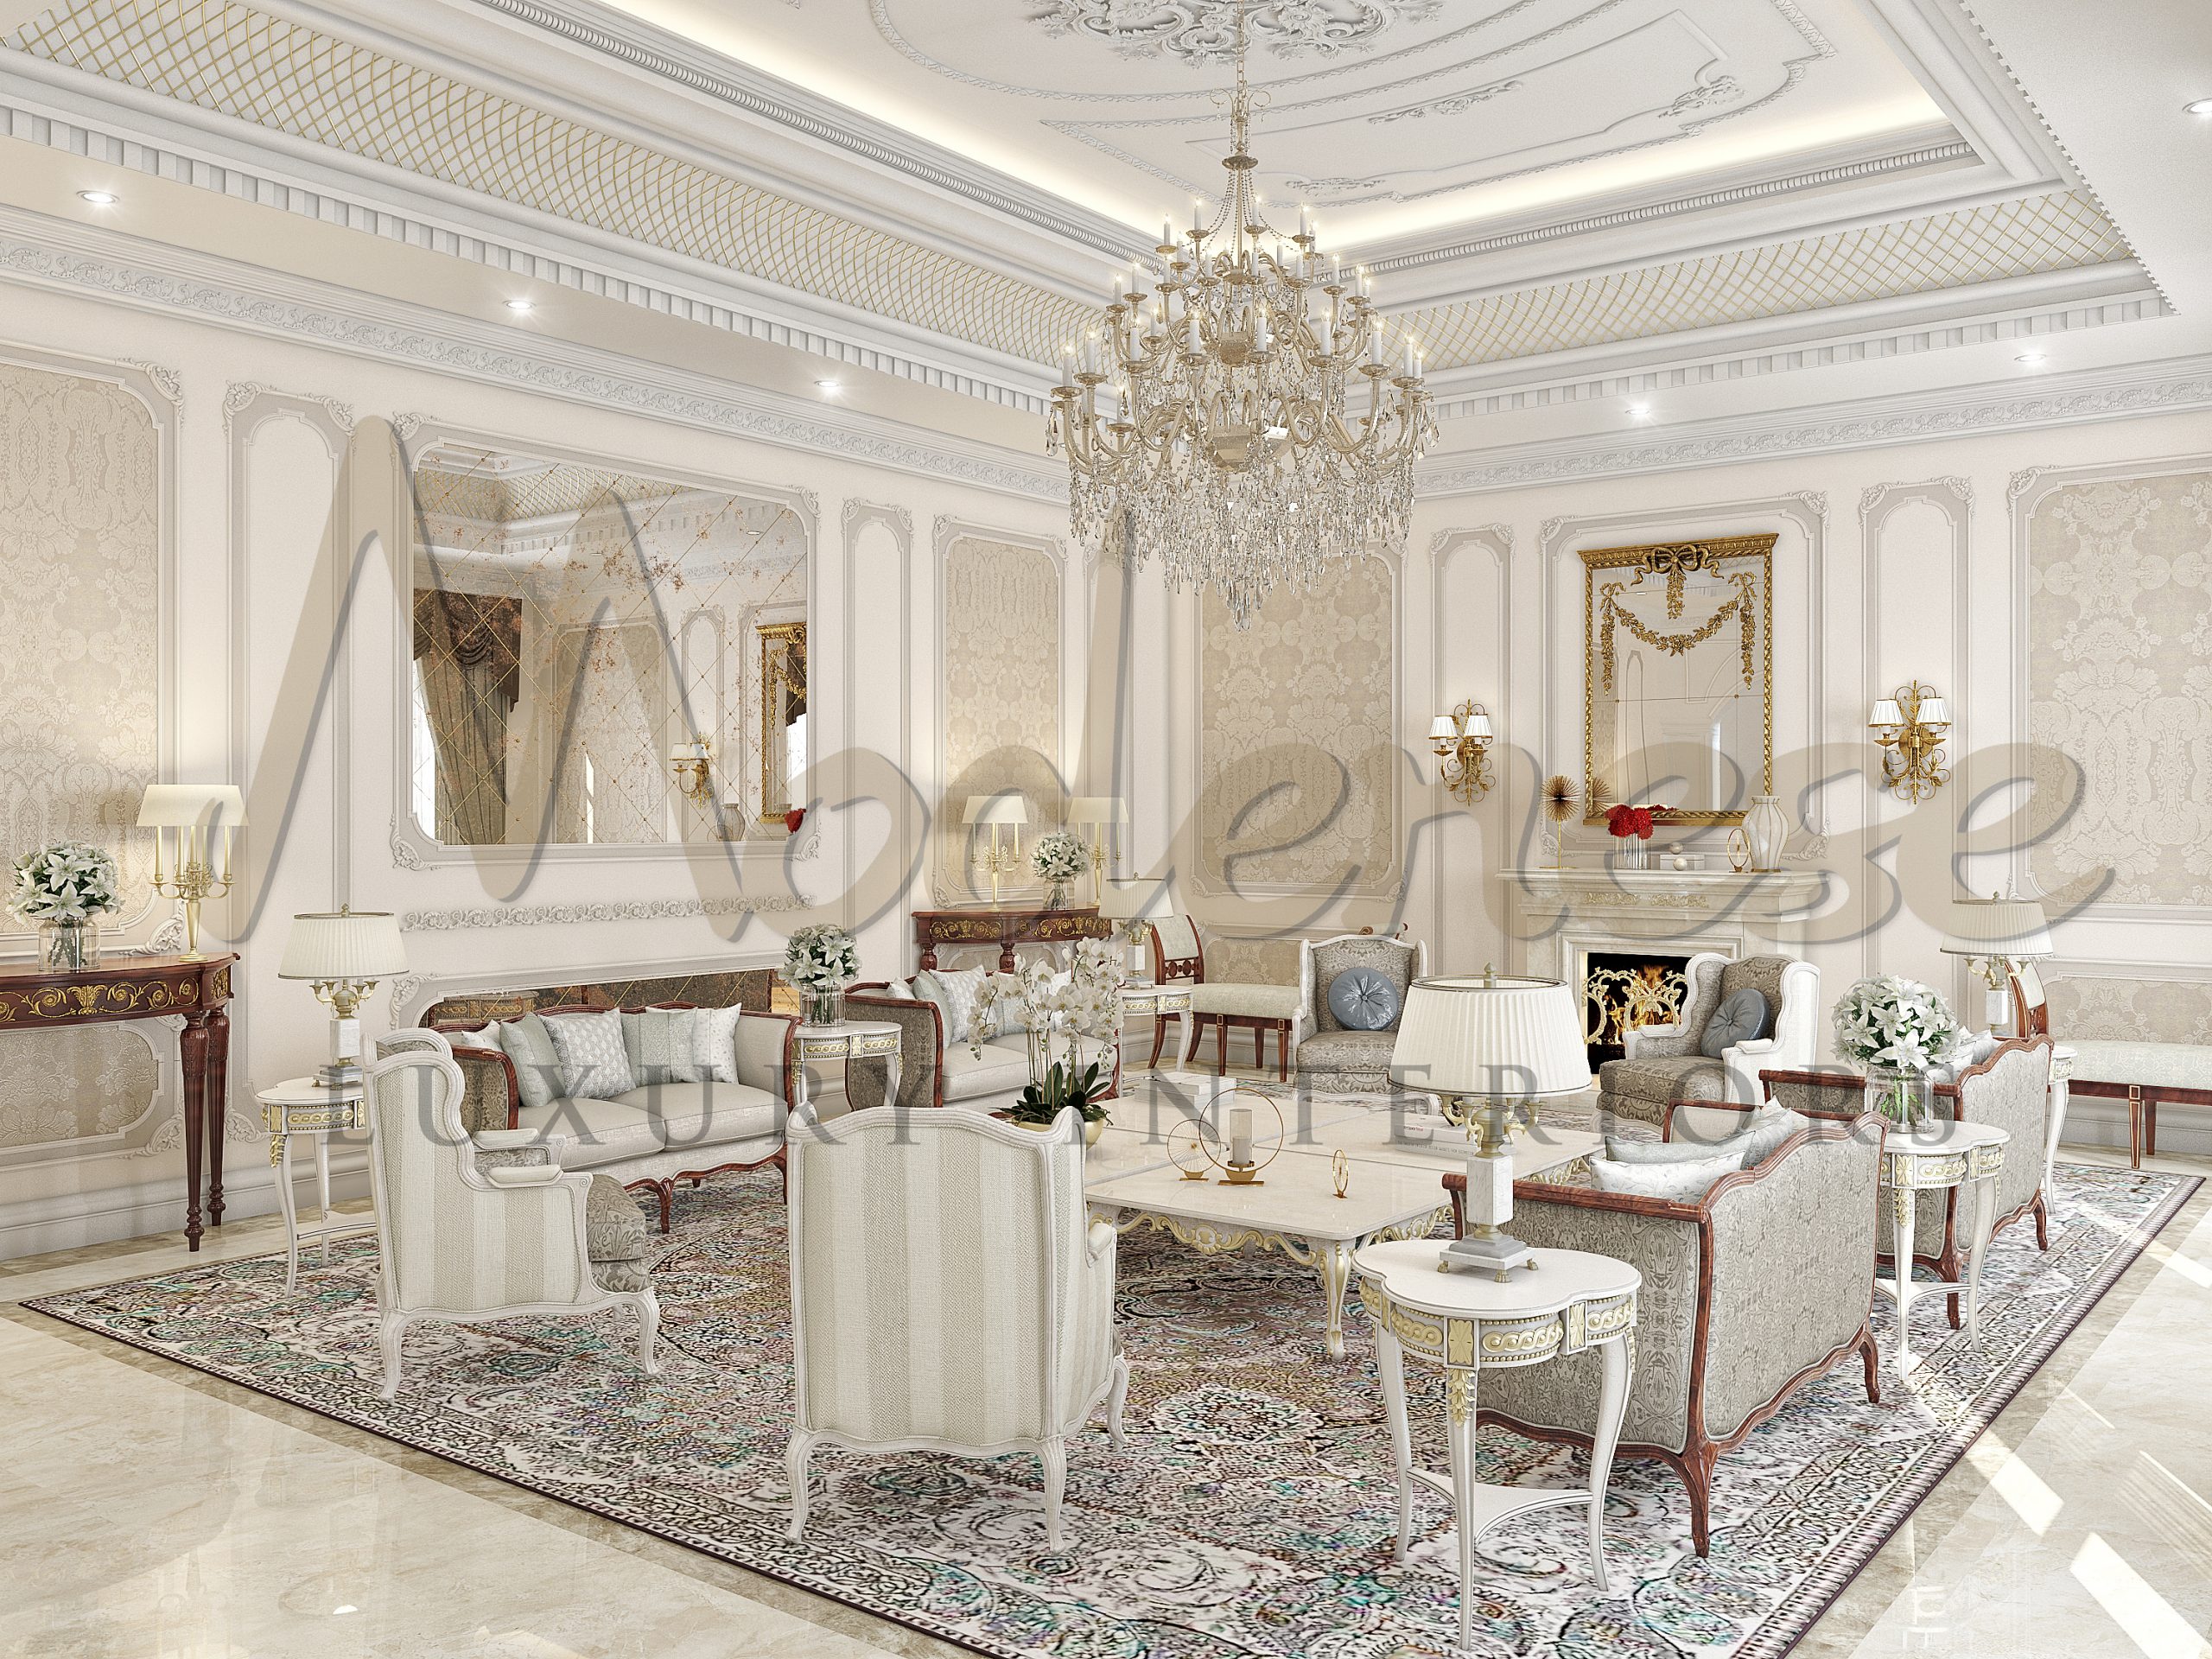 House Design in Moscow. Sophisticated Italian design for classic luxurious living room. Bespoke Refined Living Room Design